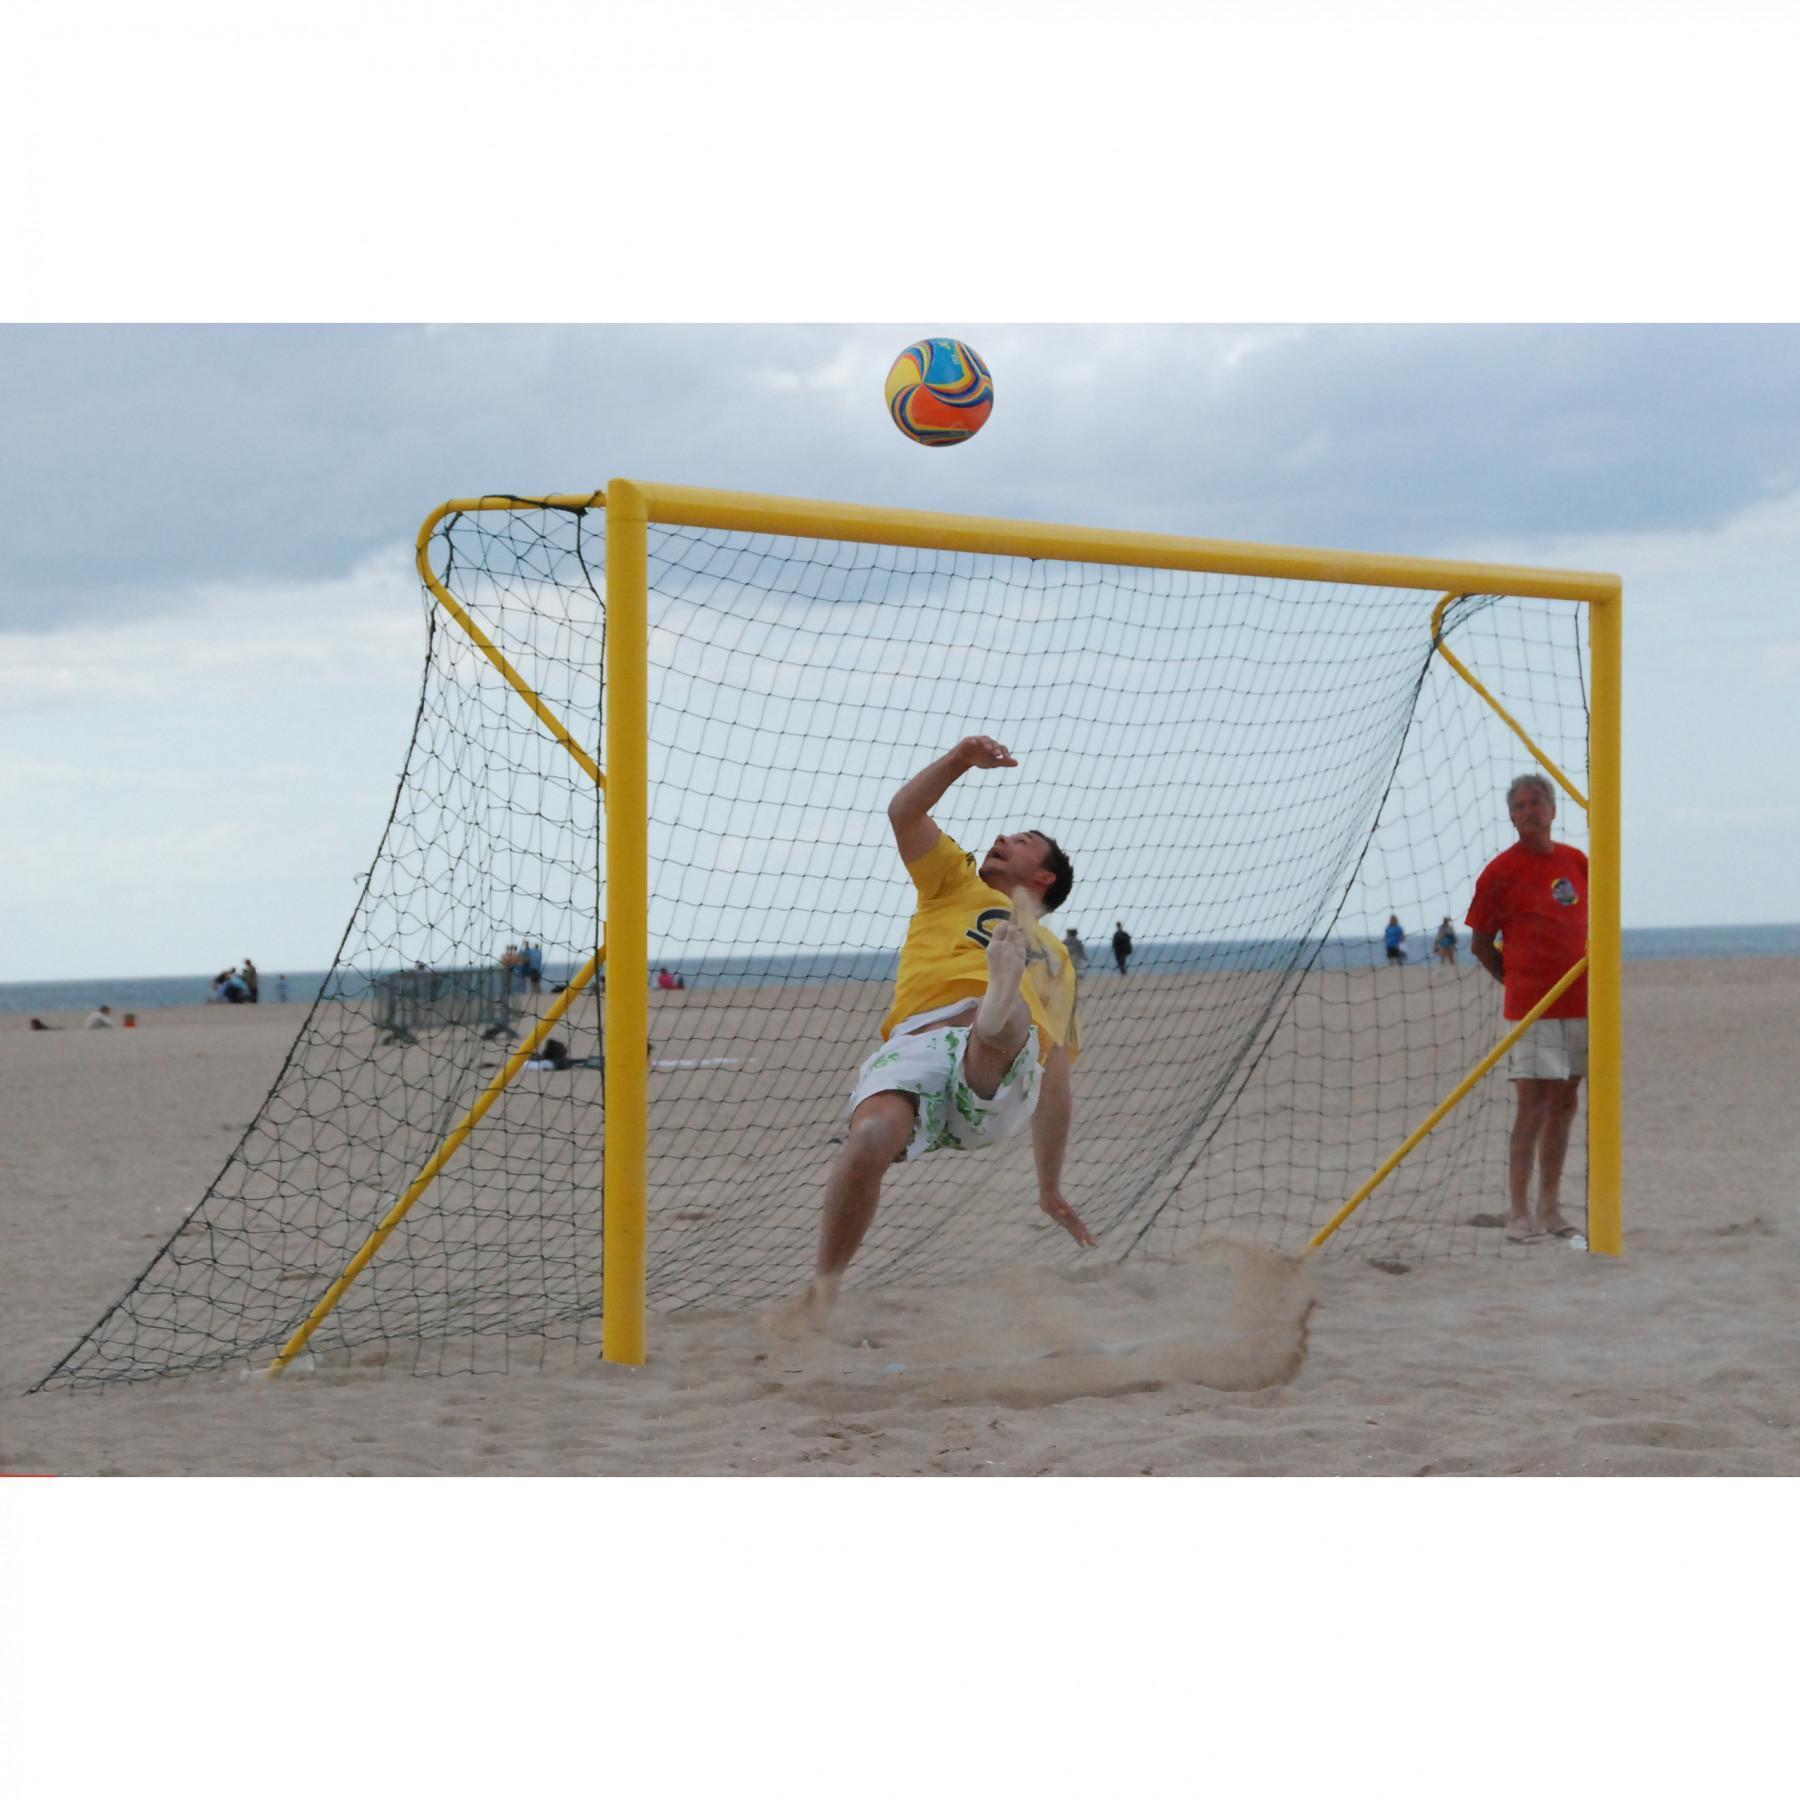 Pair of competition beach soccer goals Sporti France